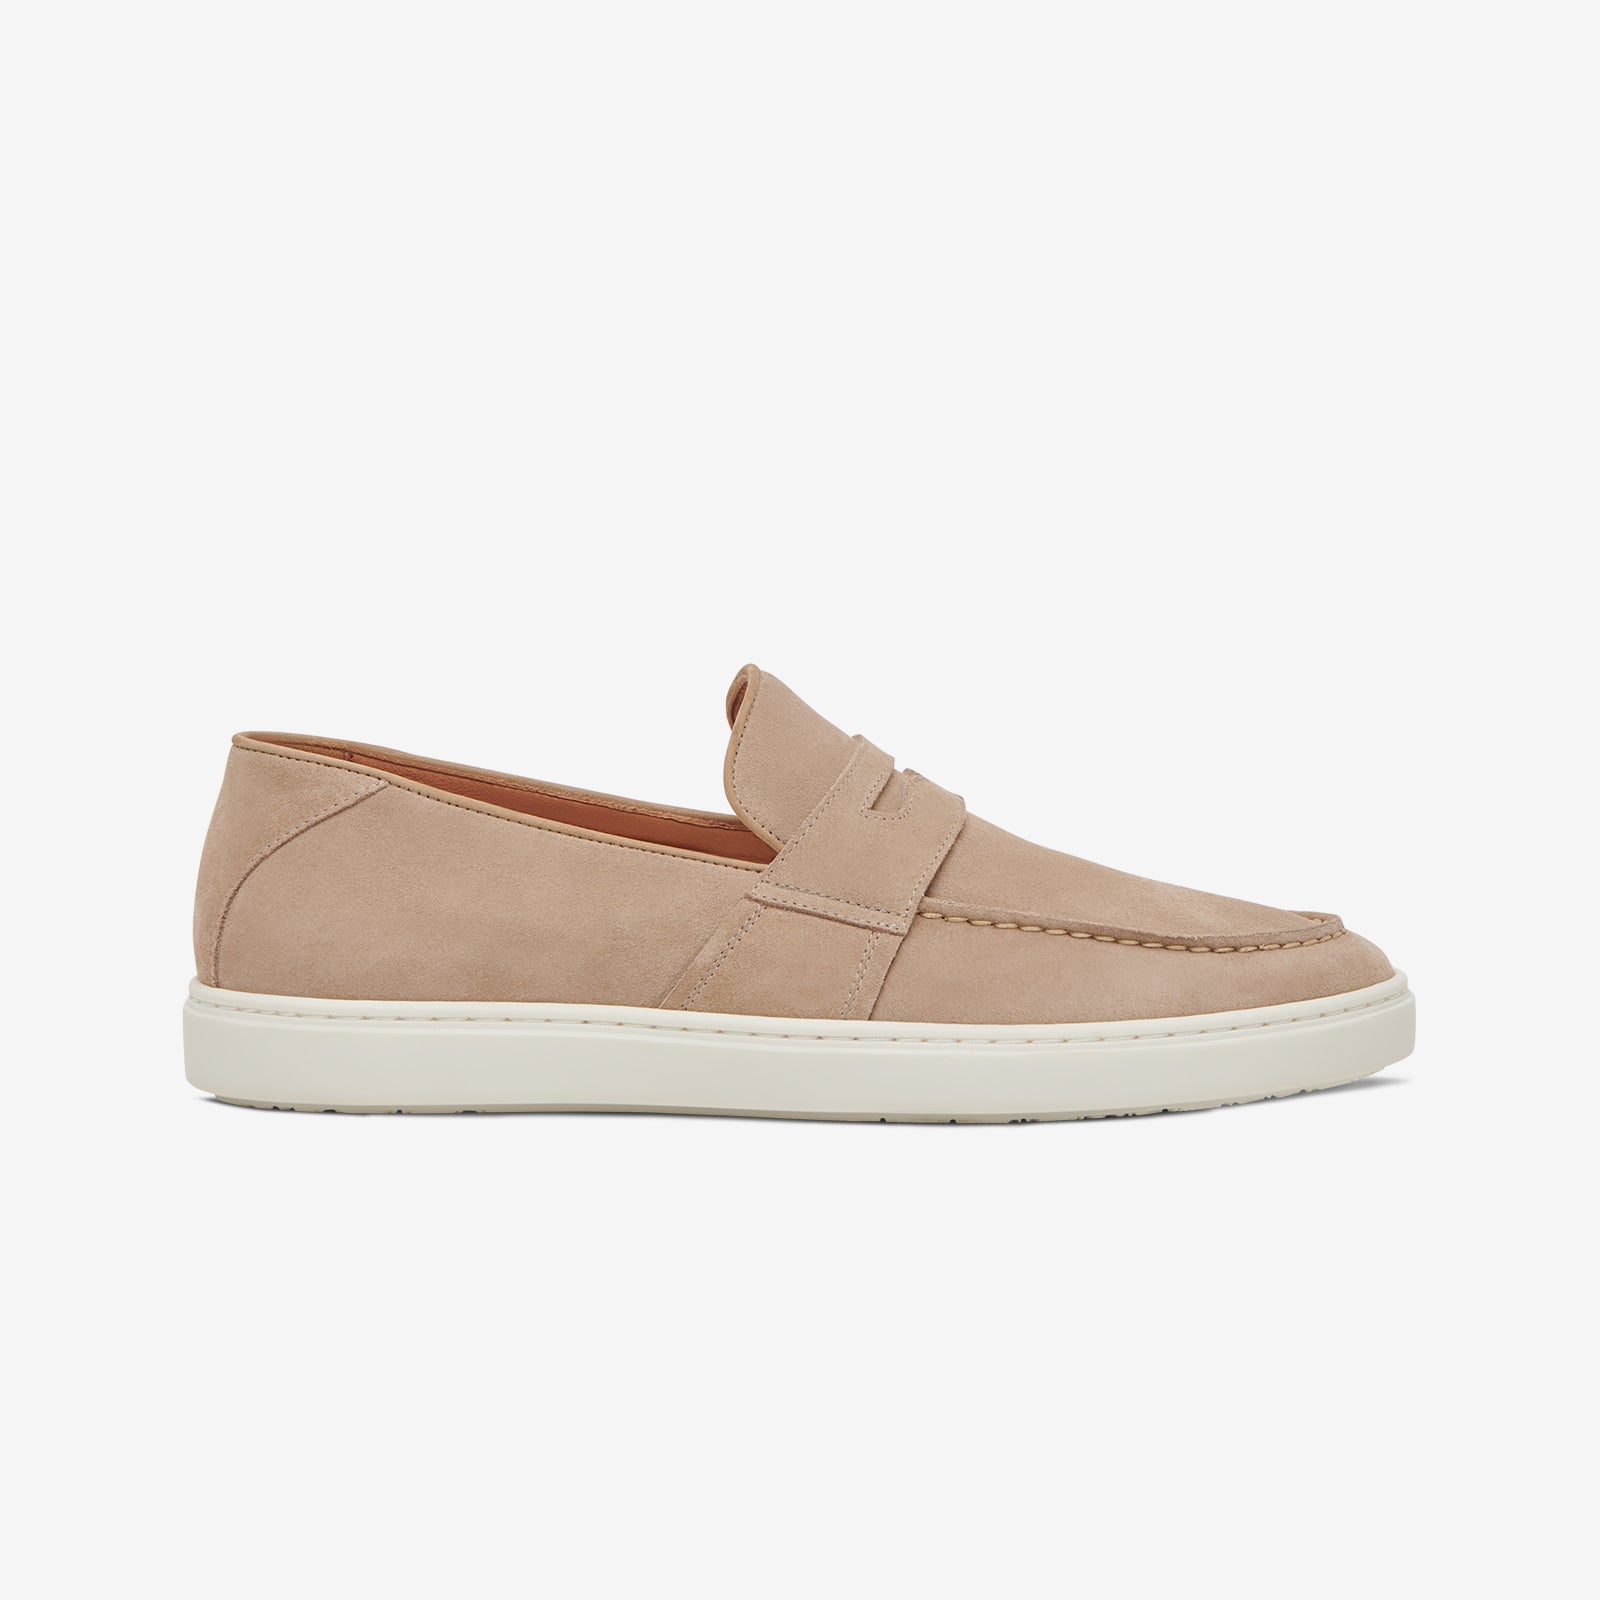 Greats - The Paros Penny Loafer - Sand - Men's Shoe – GREATS